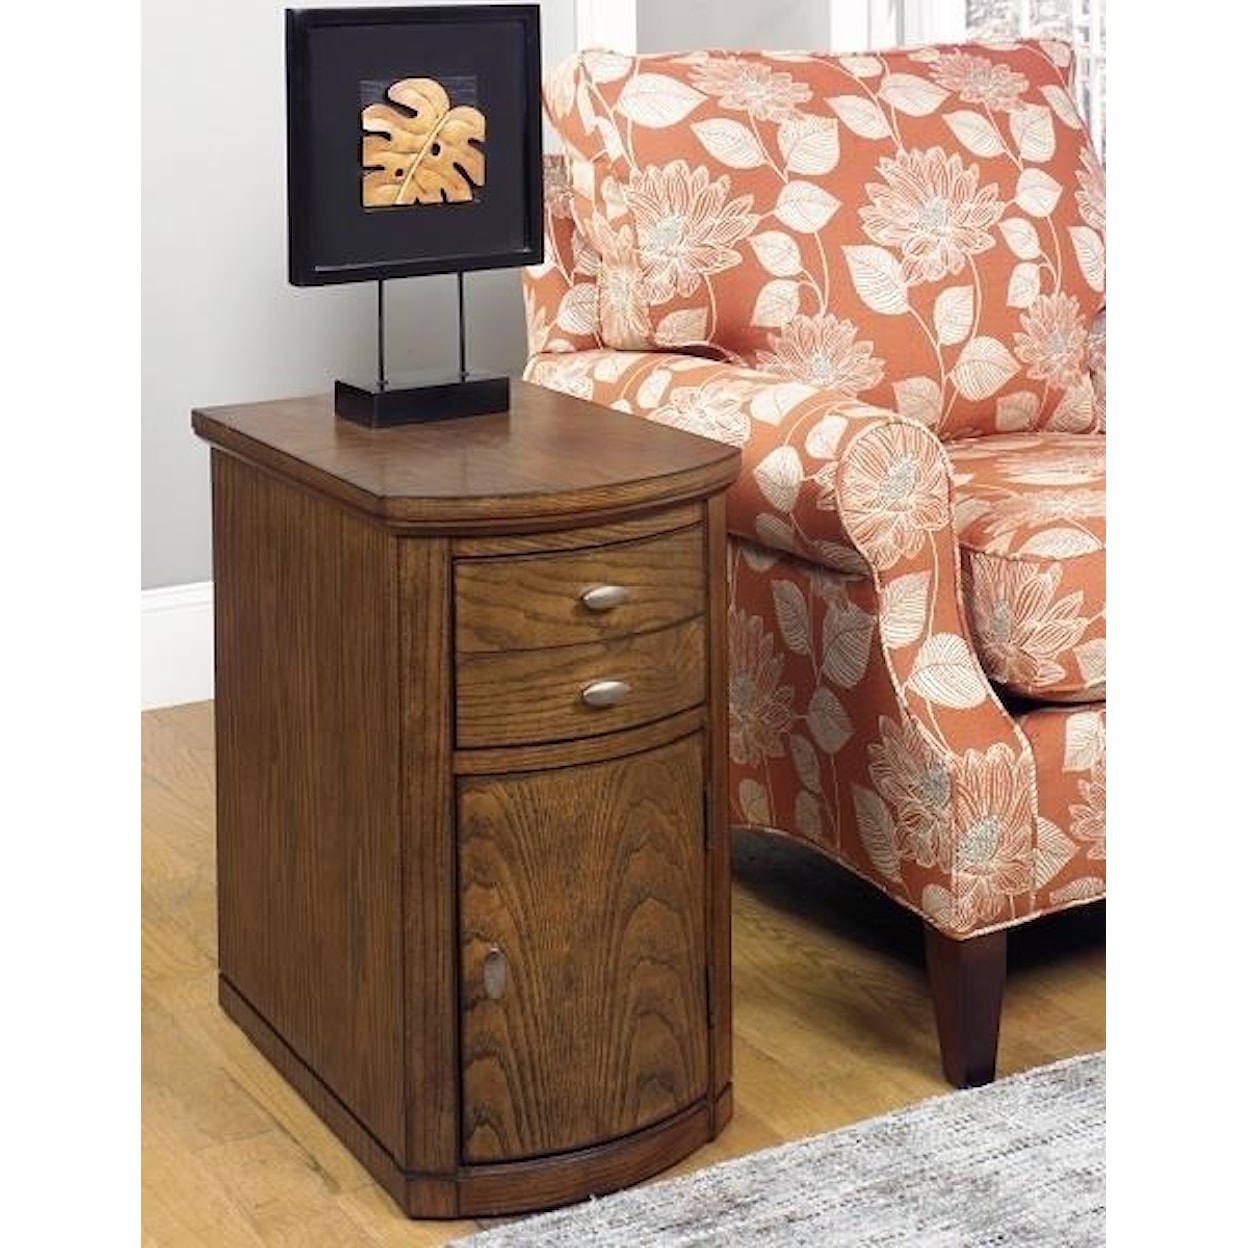 Null Furniture 2016 Chairside Cabinet